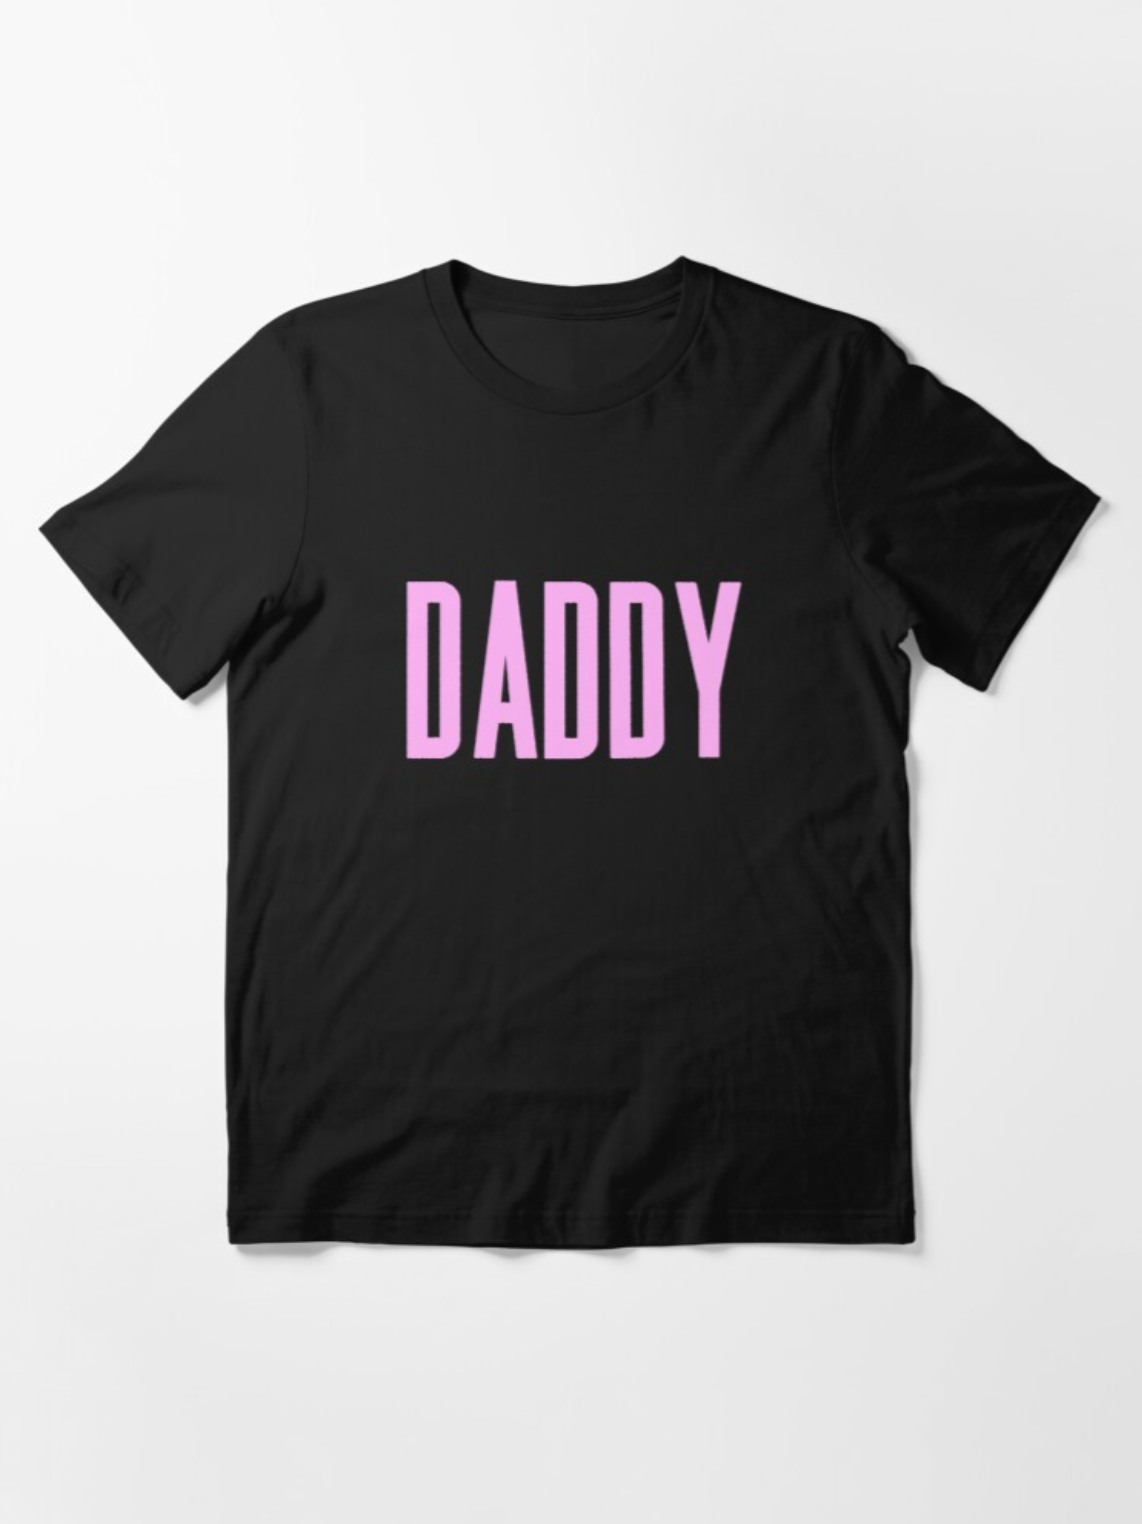 'Daddy' Shirt - 45.00 with free shipping on Gays+ Store 